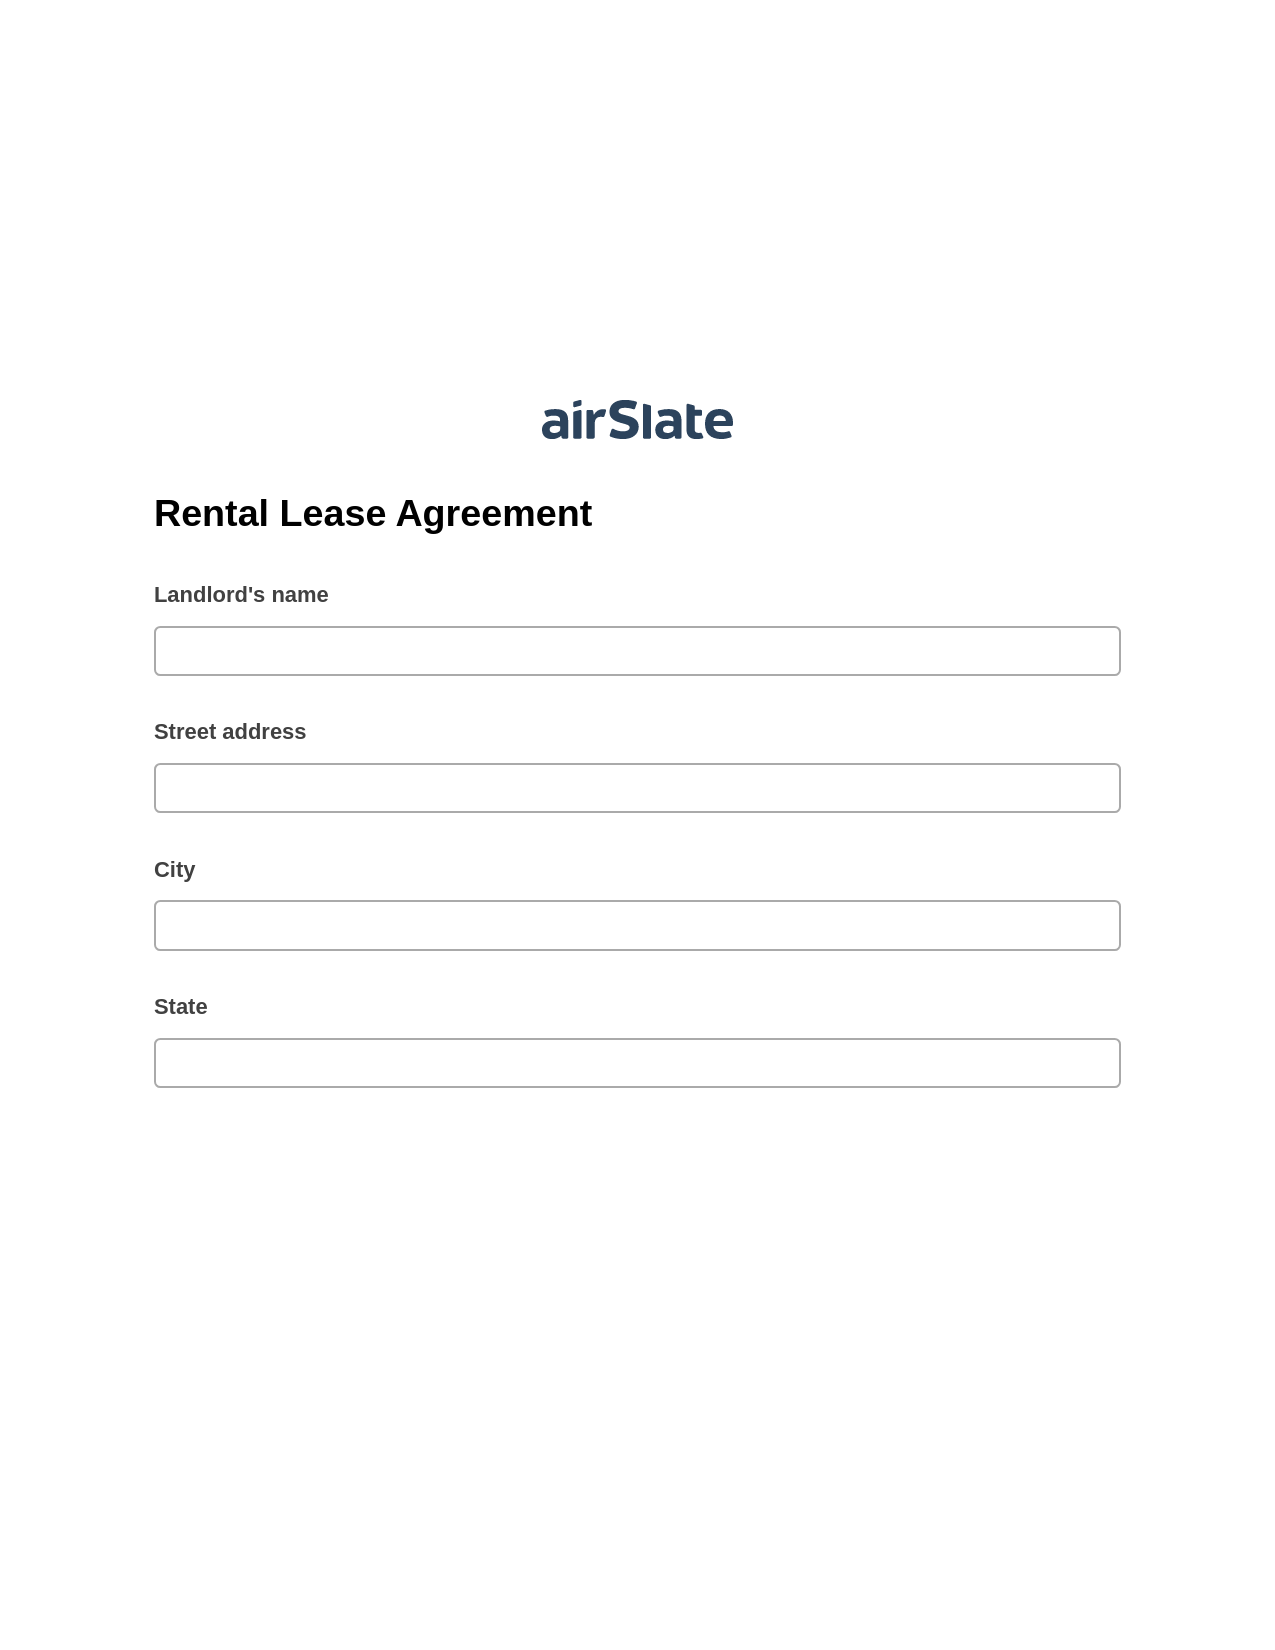 Multirole Rental Lease Agreement Pre-fill Slate from MS Dynamics 365 Records Bot, Lock the slate bot, Export to Smartsheet